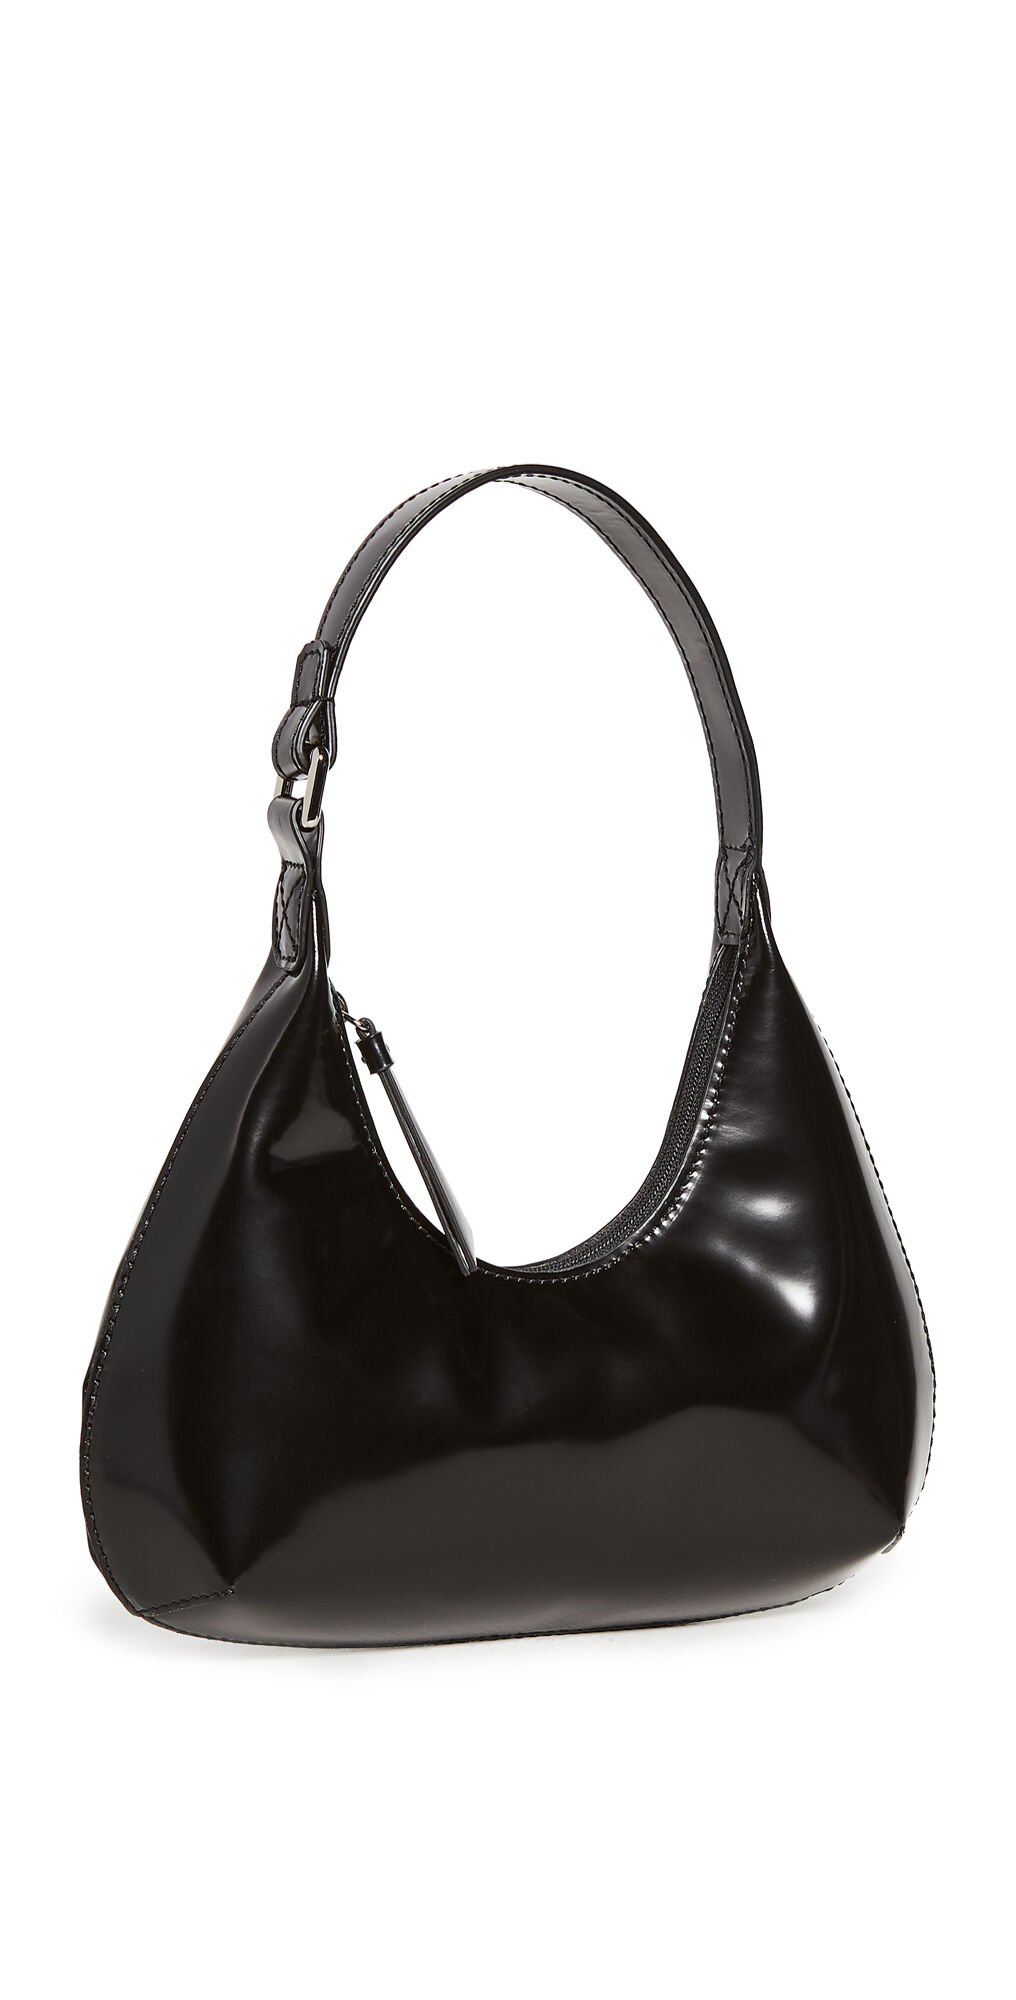 BY FAR Baby Amber Black Semi Patent Leather Bag Black One Size  Black  size:One Size